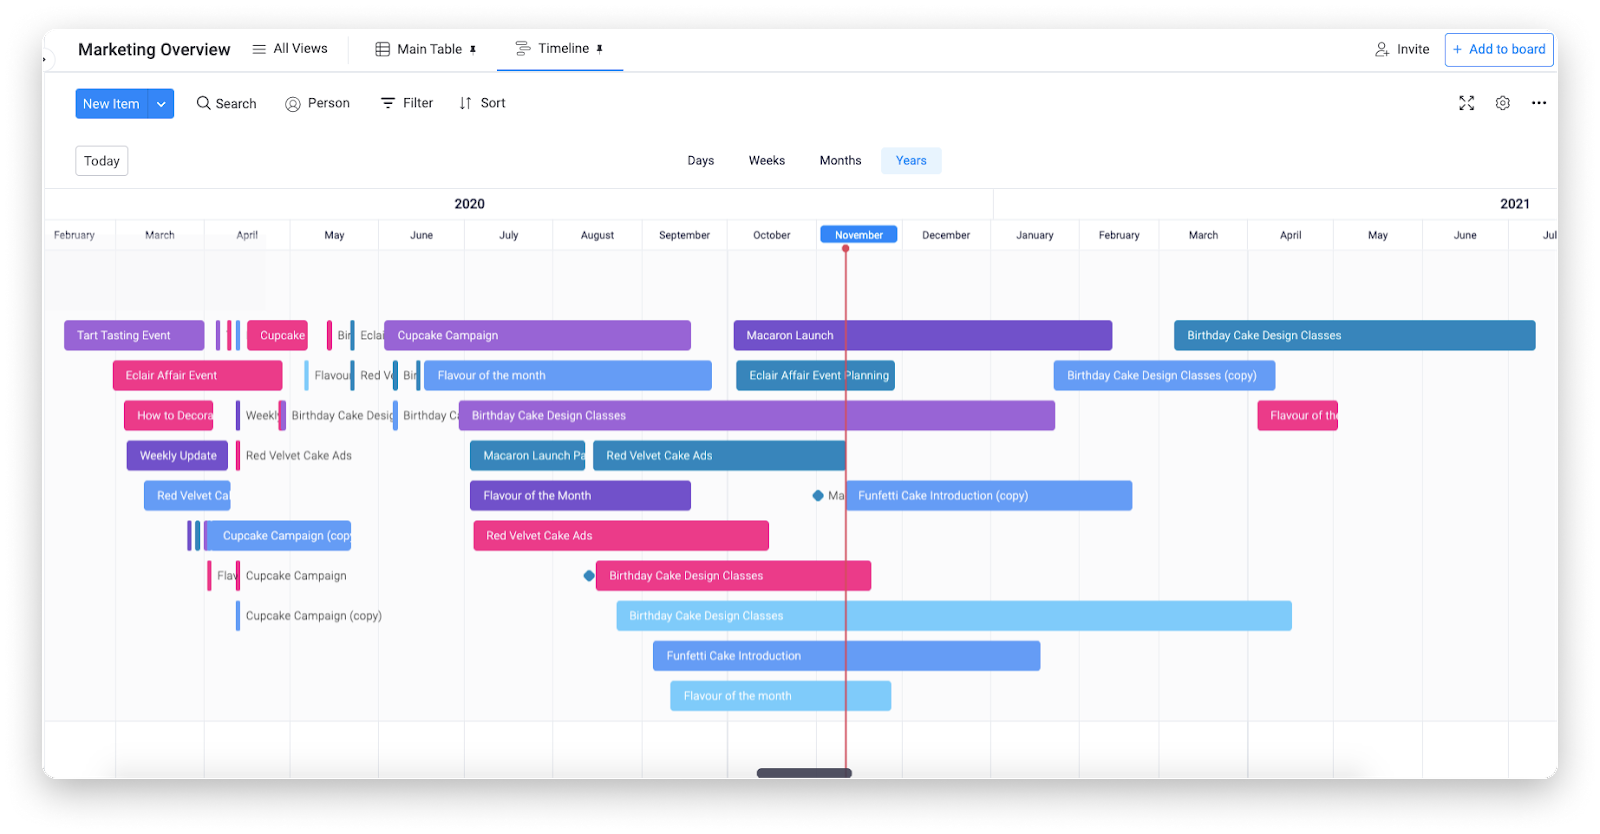 Project Timeline Explained And How To Create One